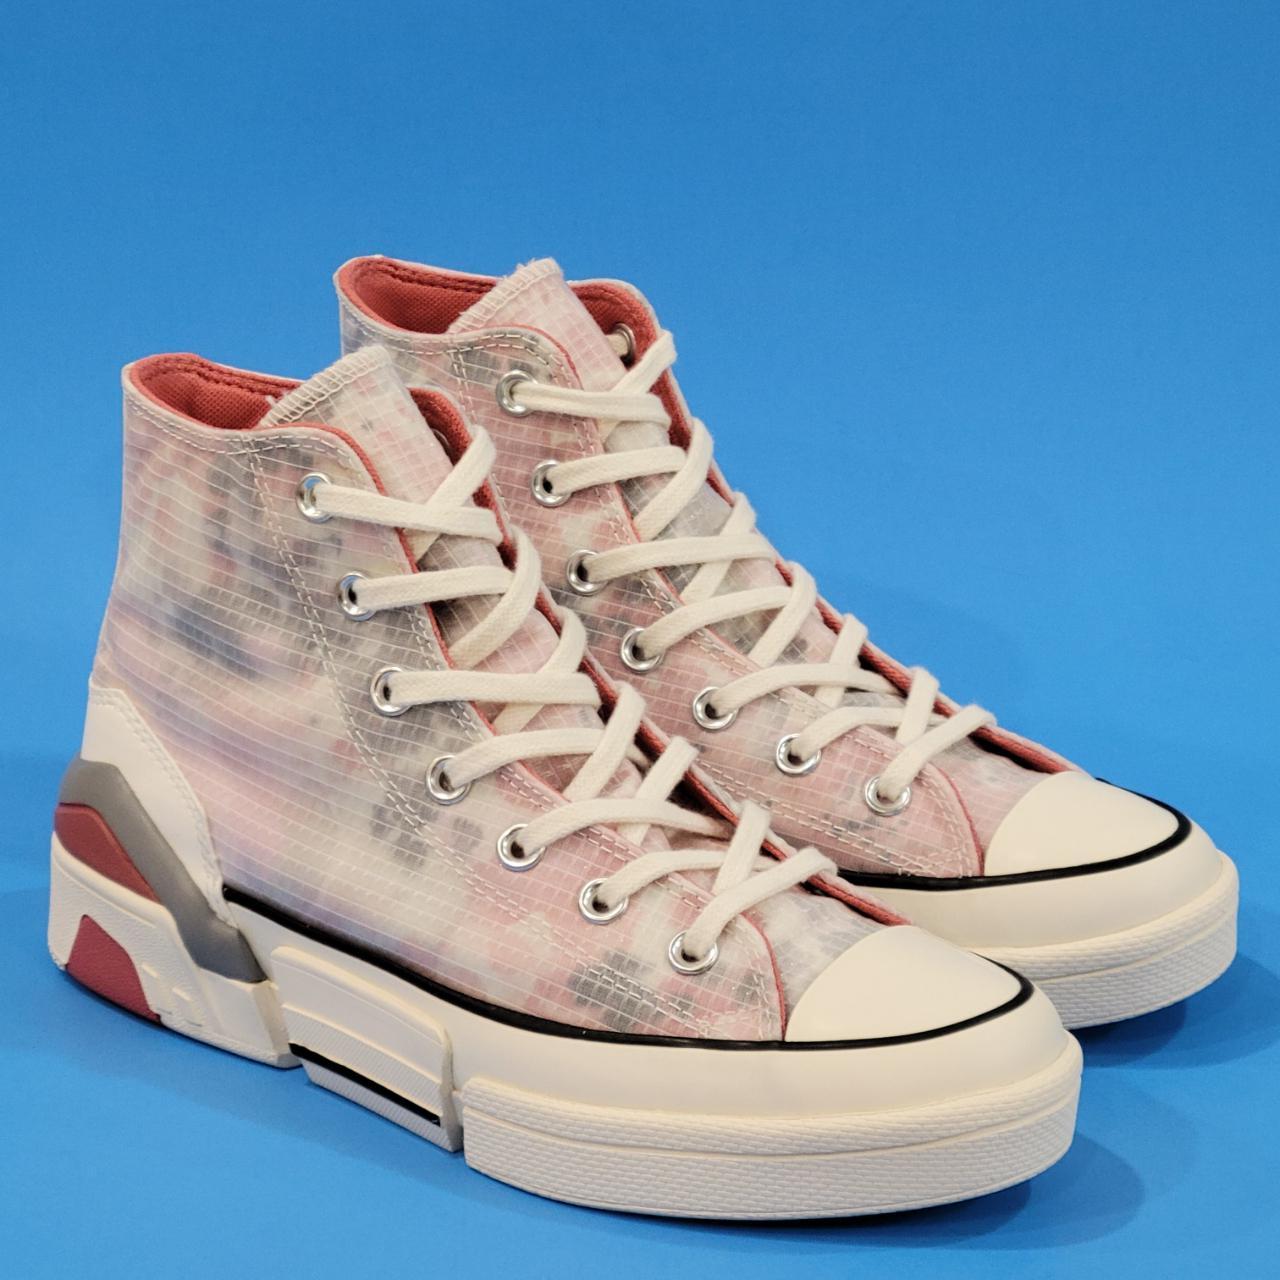 converse washed floral